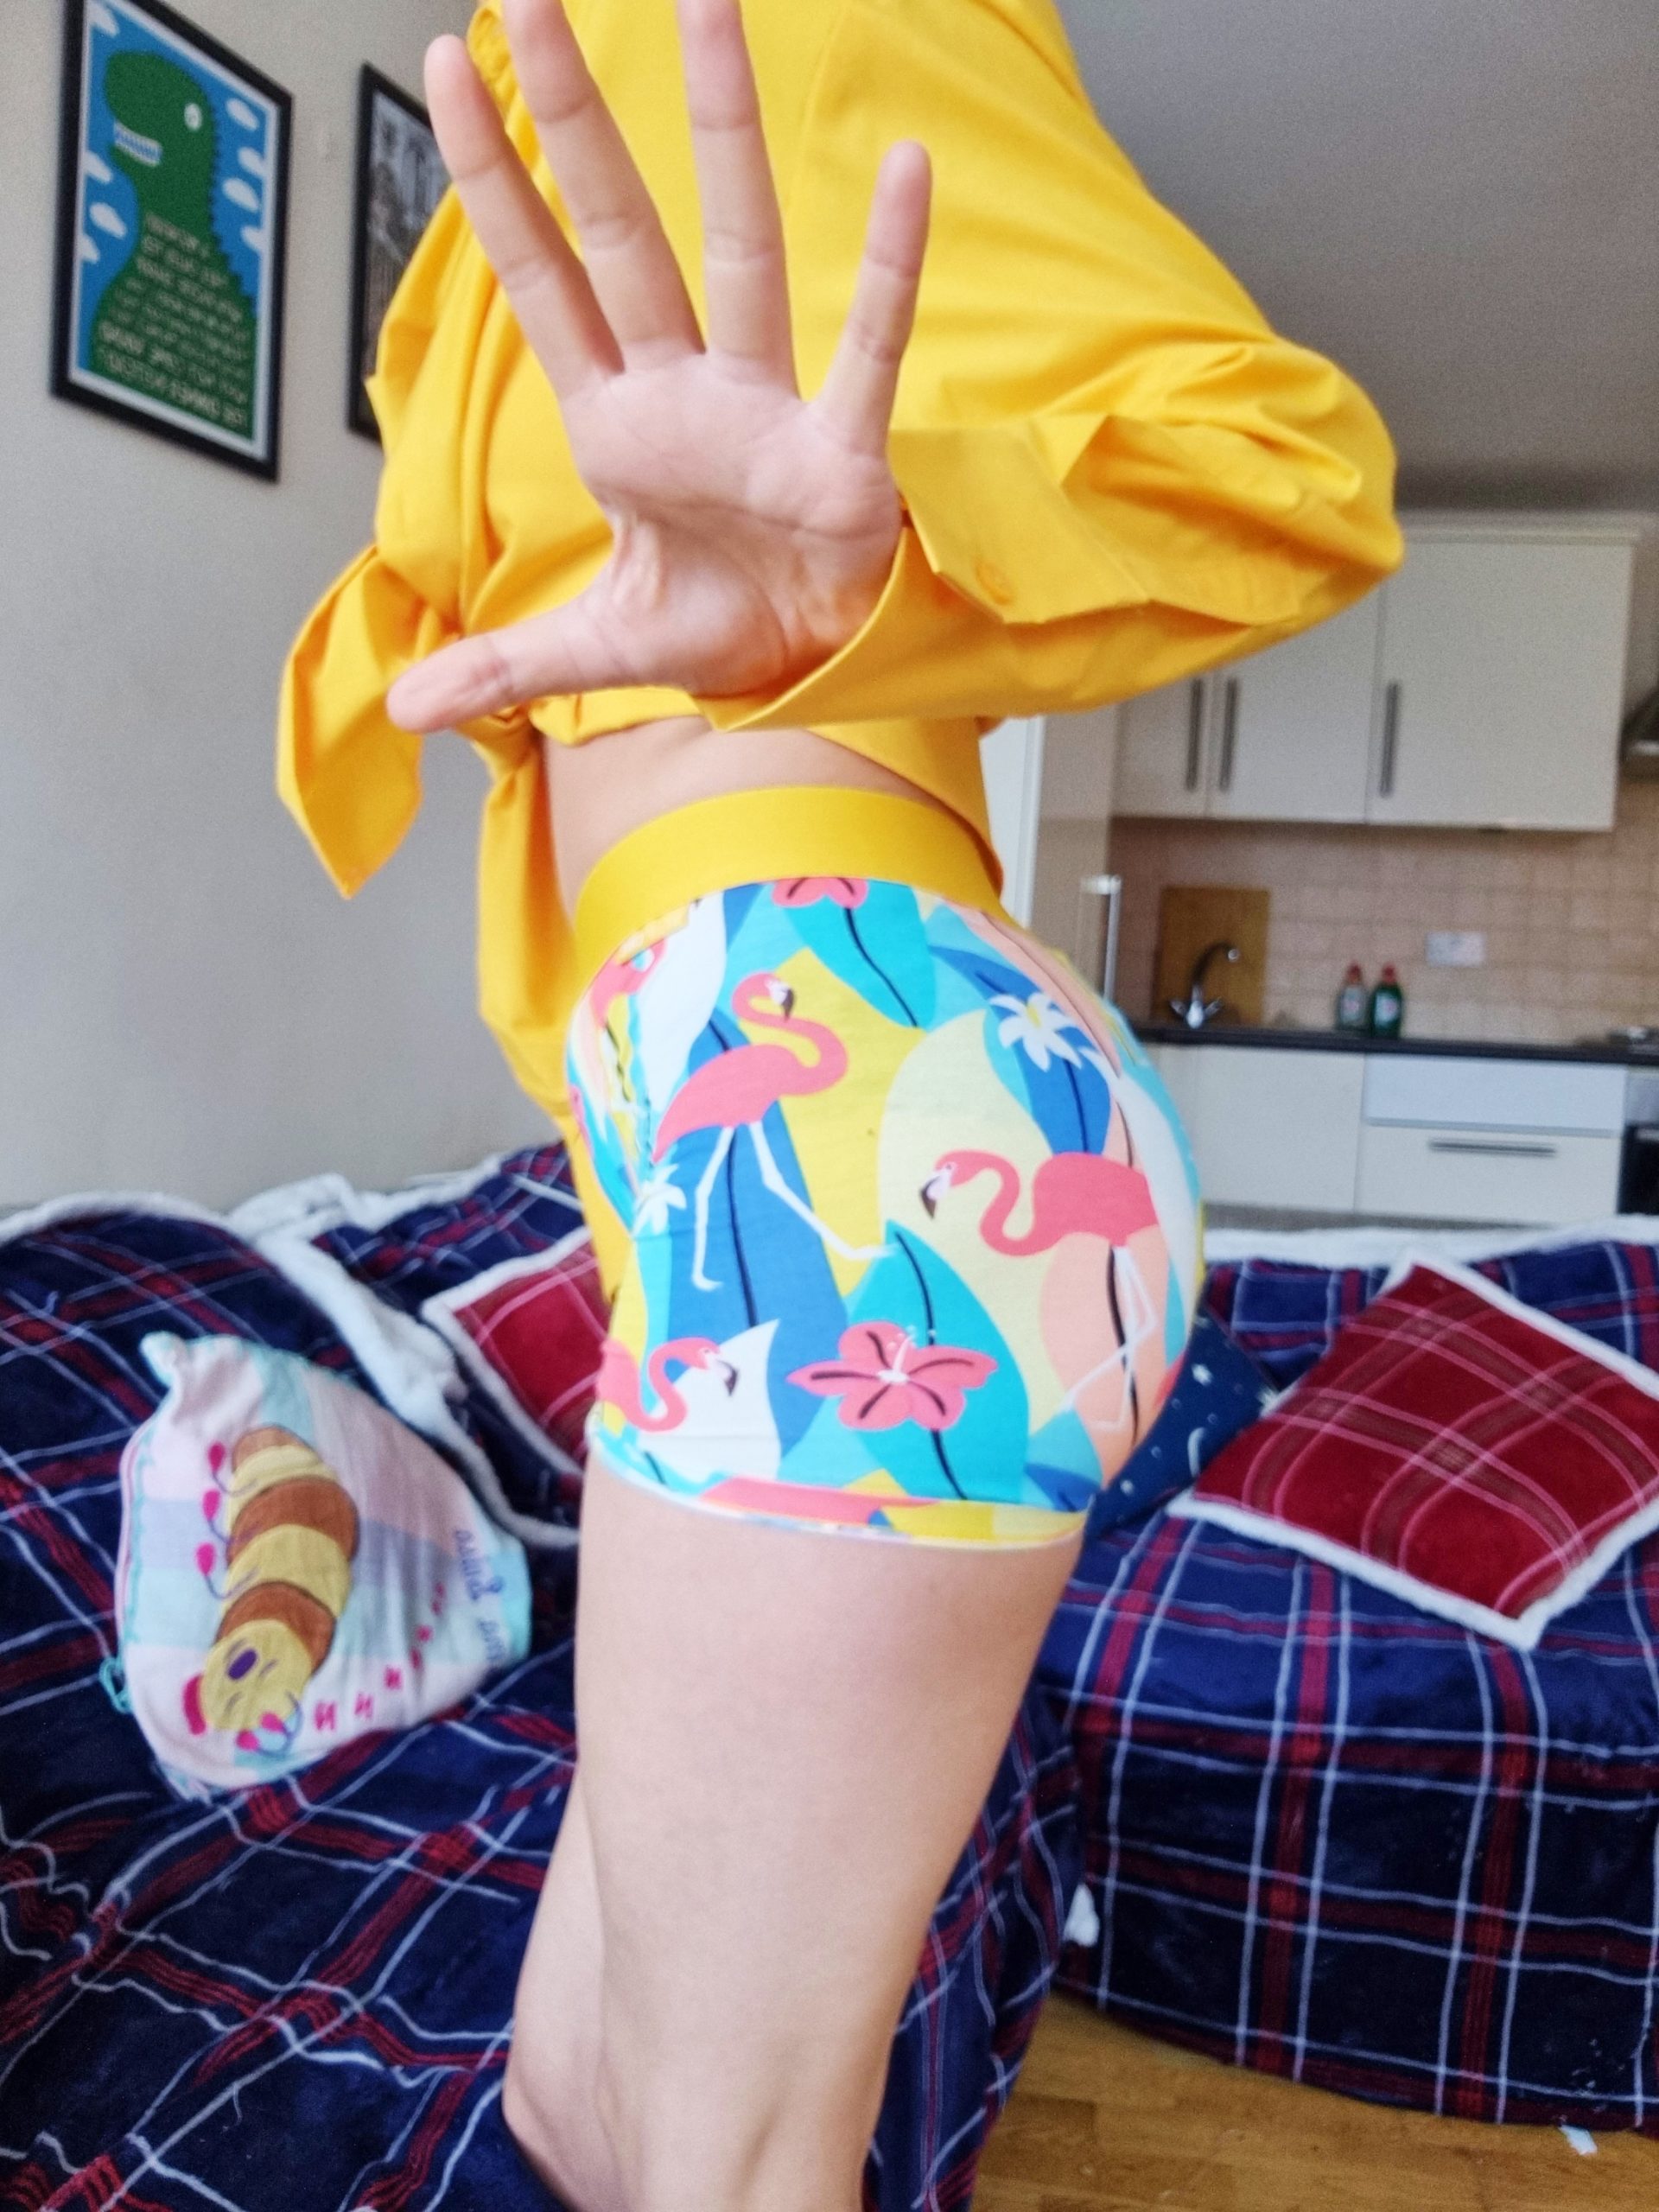 <img src="ana.jpg" alt="ana in yellow knotted shirt and flamingo boxers"> 